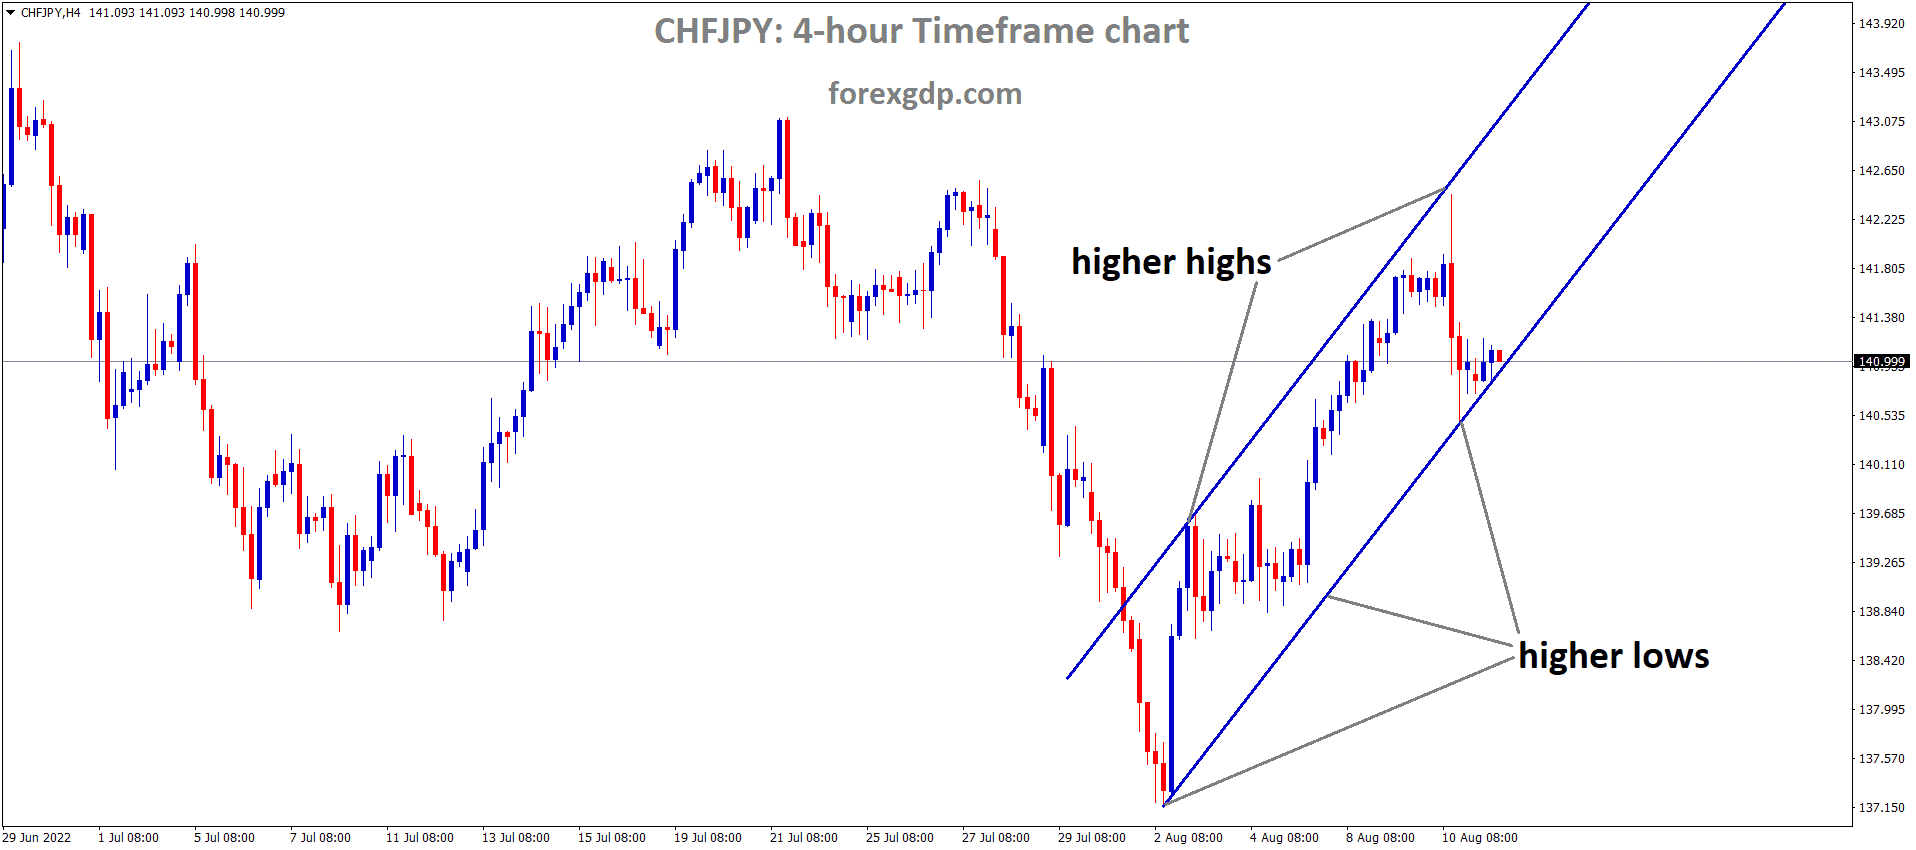 CHFJPY is moving in an Ascending channel and the Market has reached the higher low area of the channel